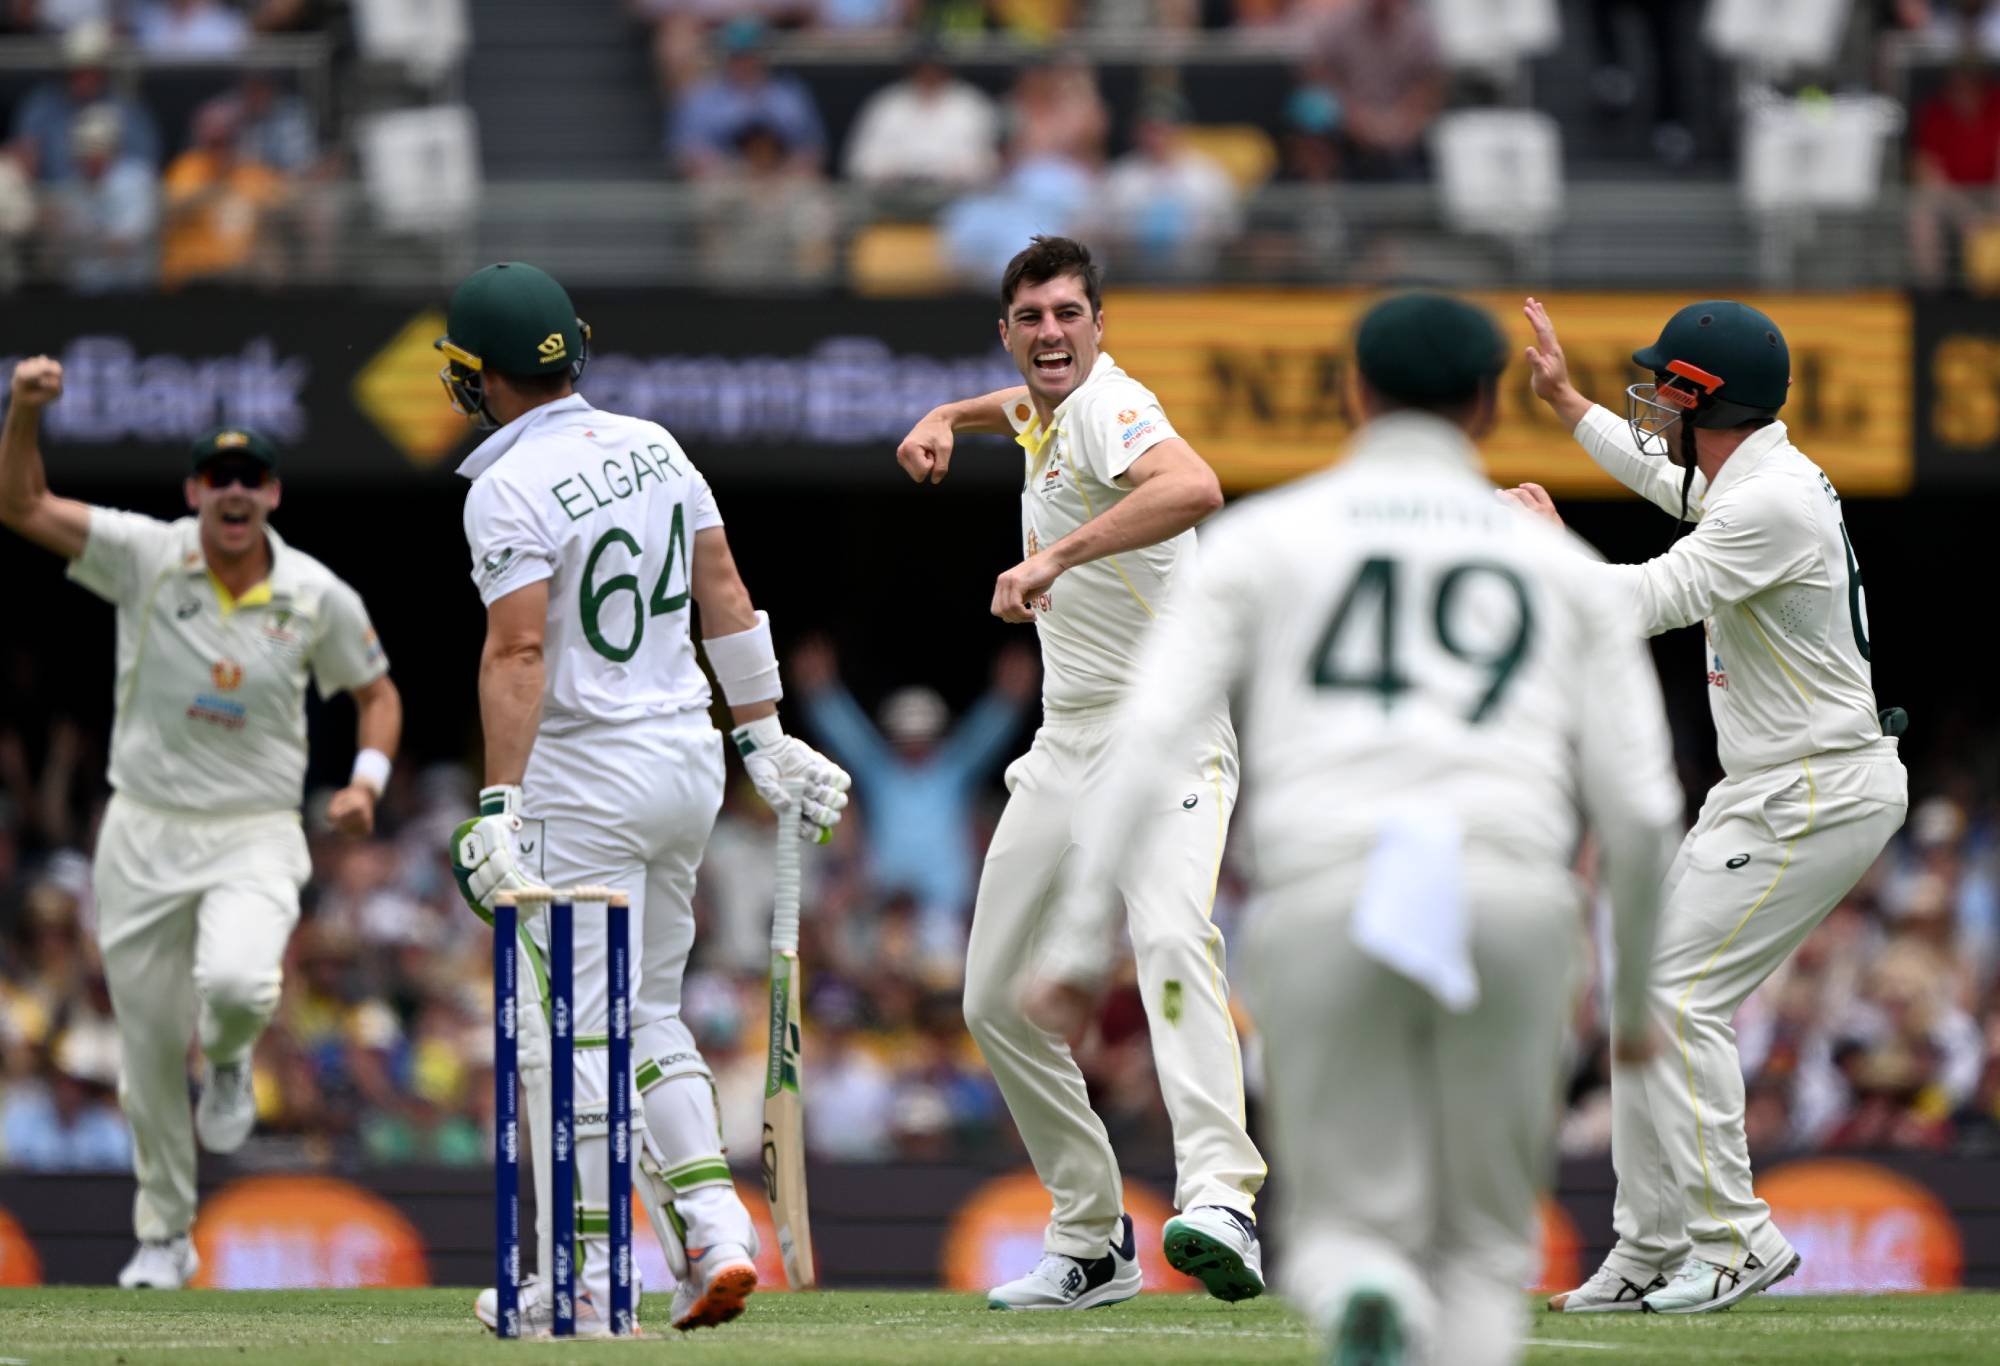 BRISBANE, AUSTRALIA - DECEMBER 18: Pat Cummins of Australia celebrates with team mates after taking the wicket of Dean Elgar of South Africa during day two of the First Test match between Australia and South Africa at The Gabba on December 18, 2022 in Brisbane, Australia. (Photo by Bradley Kanaris/Getty Images)